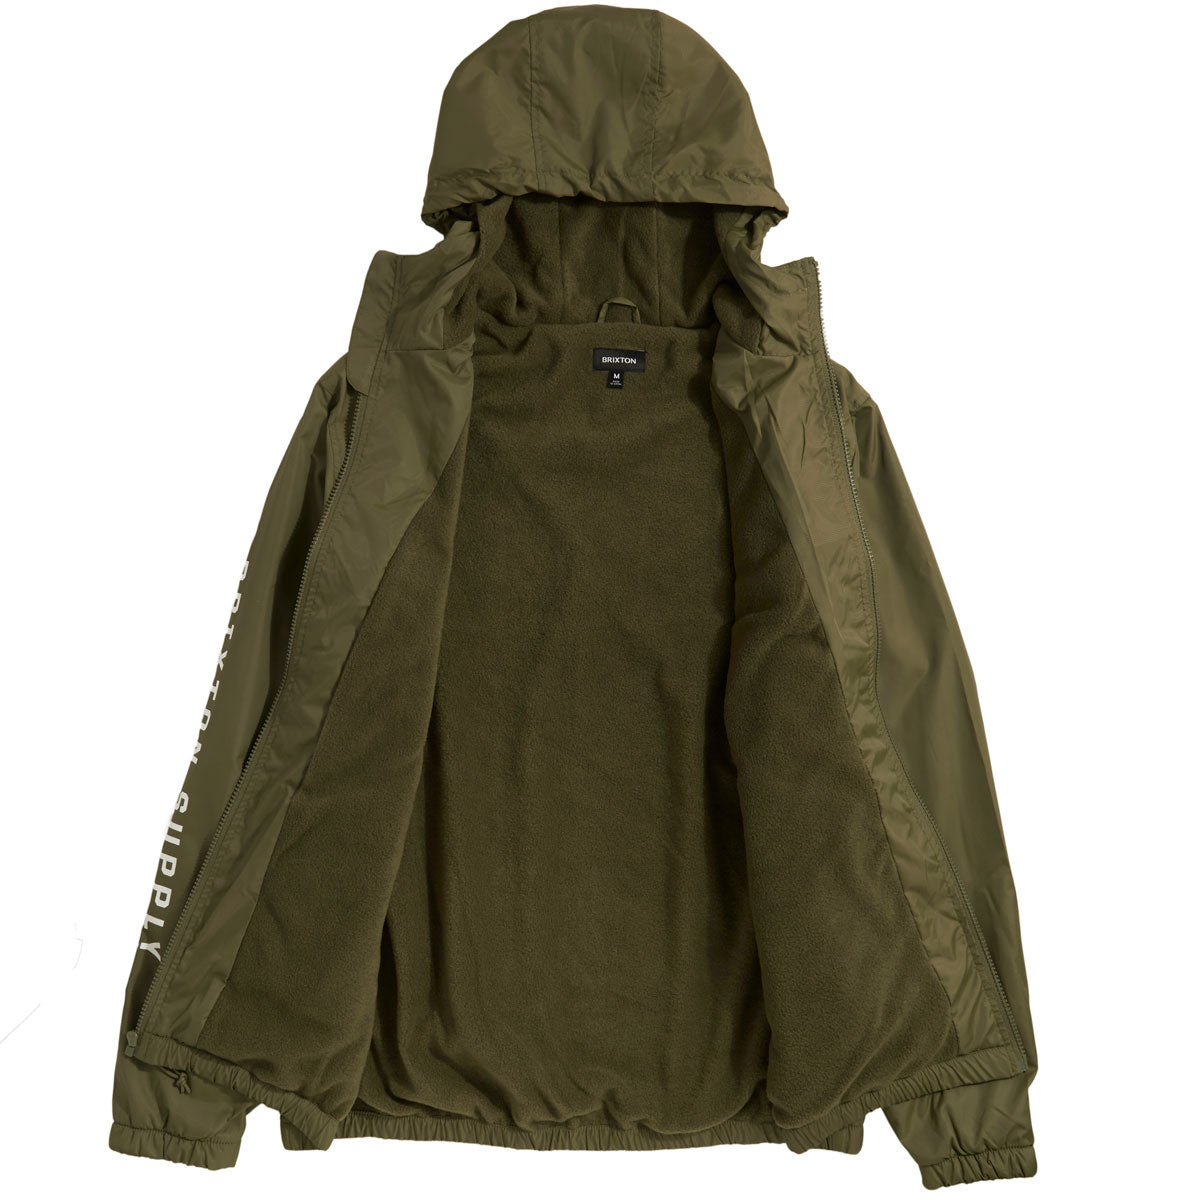 Brixton Claxton Crest Lined Jacket - Military Olive image 3